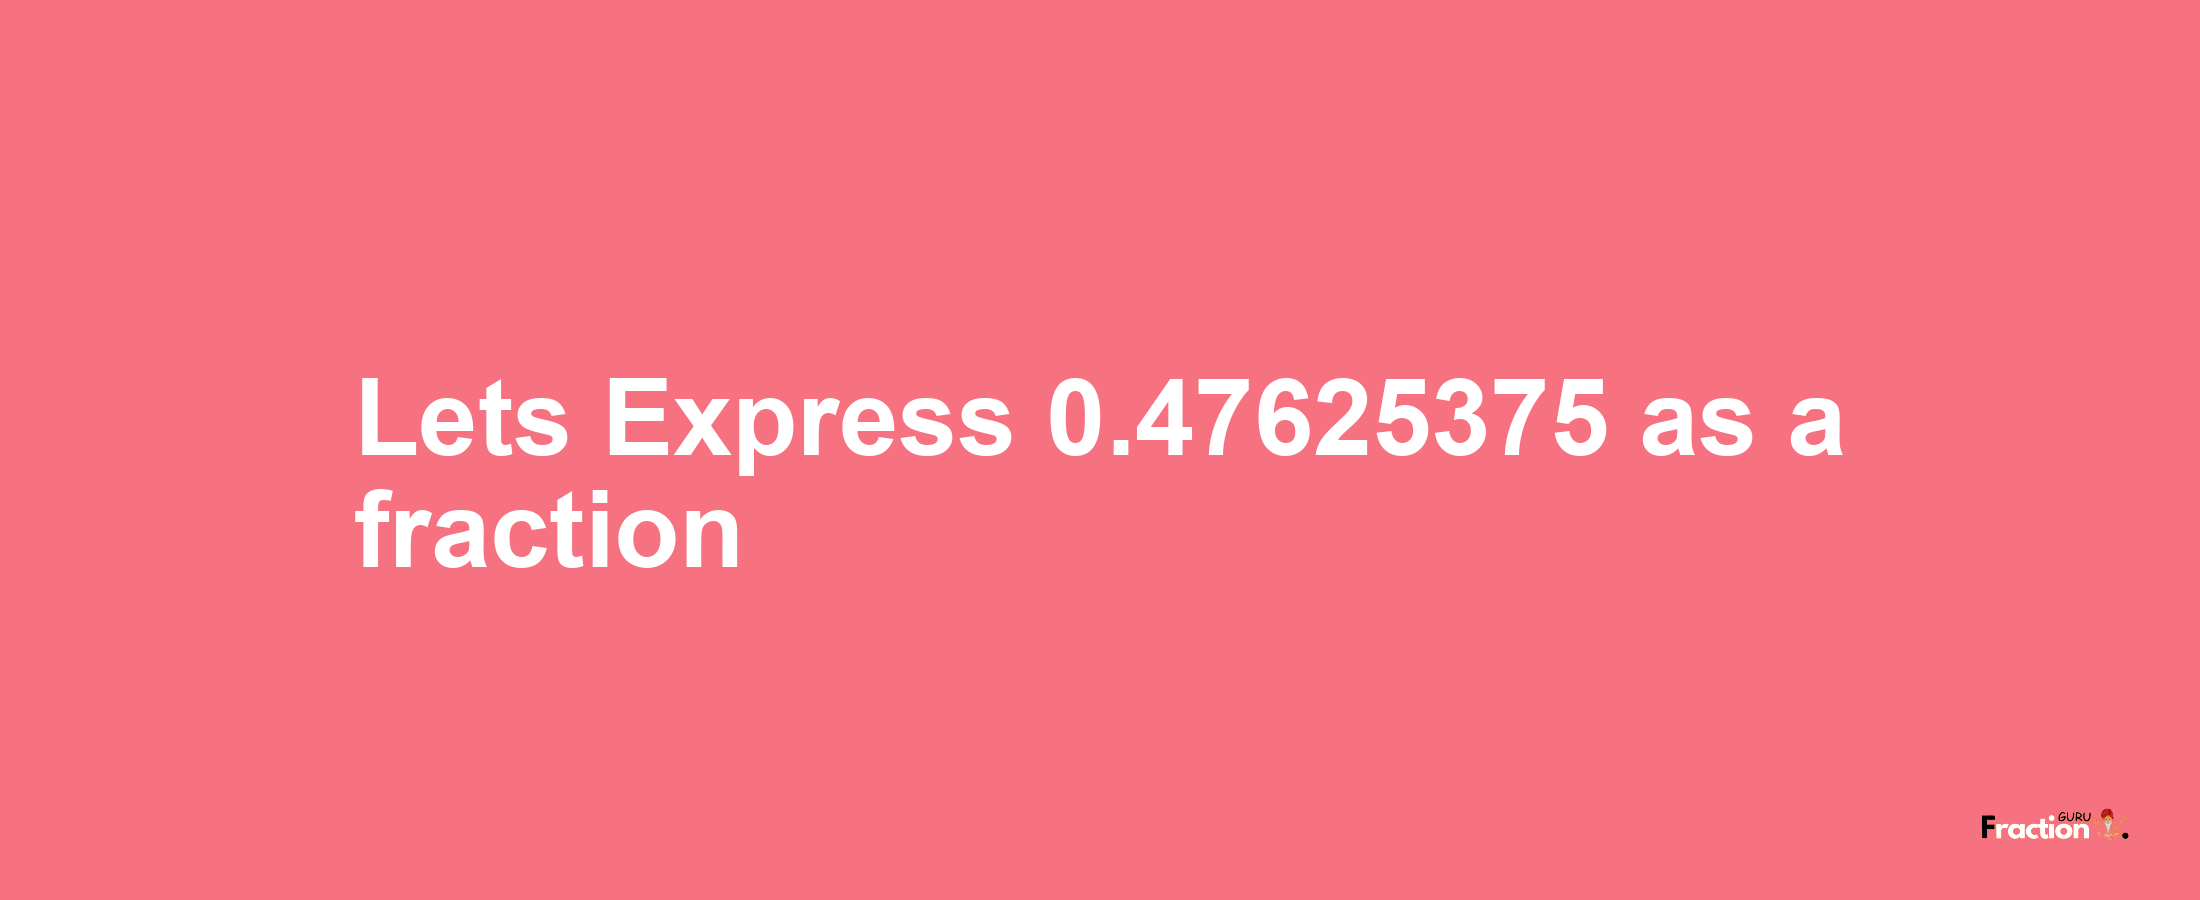 Lets Express 0.47625375 as afraction